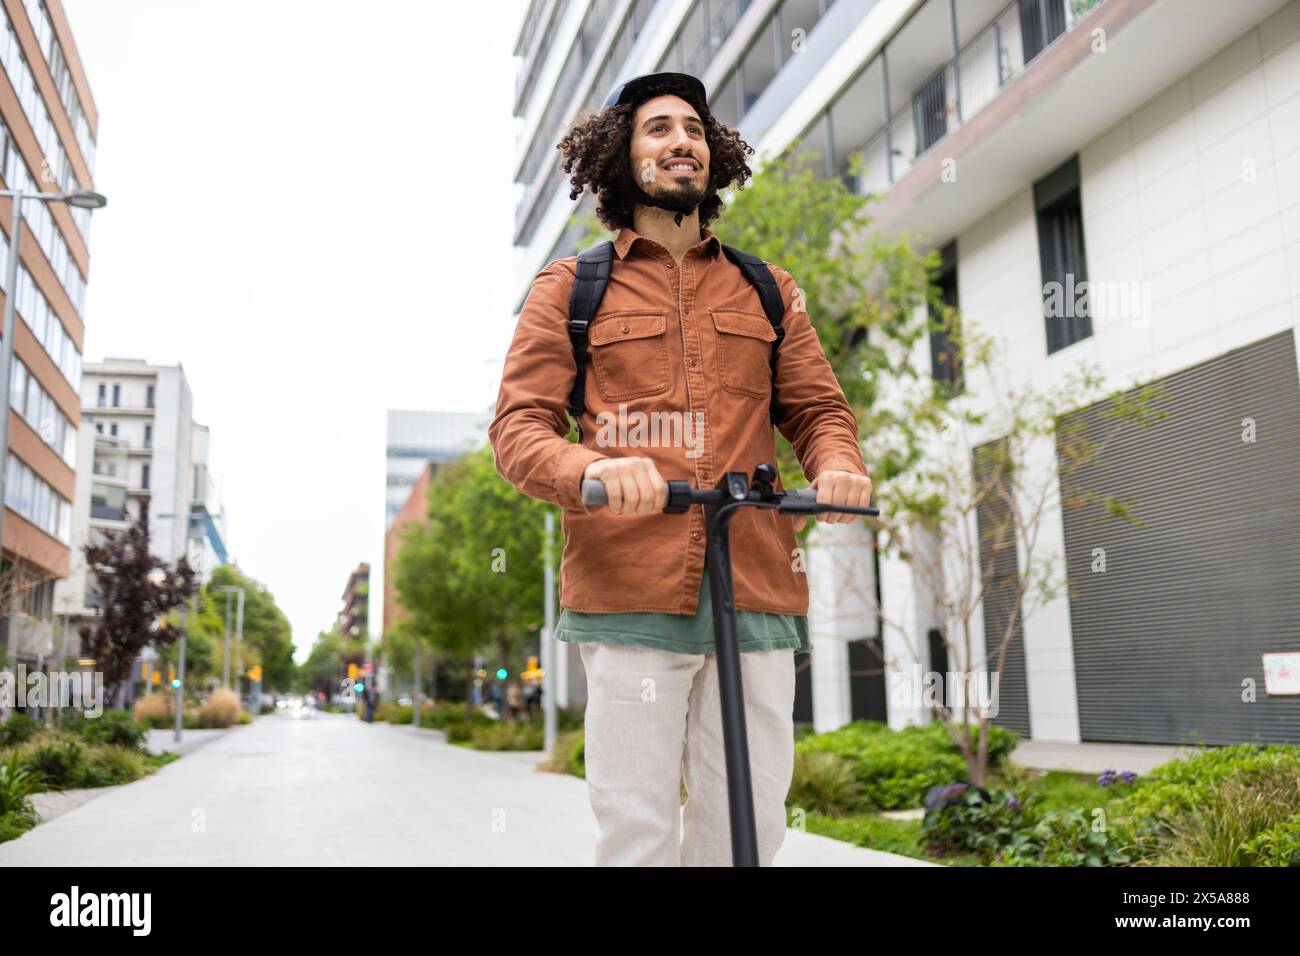 Cheerful curly-haired man navigates through a modern urban environment on an electric scooter Dressed in a stylish brown jacket and carrying a backpac Stock Photo